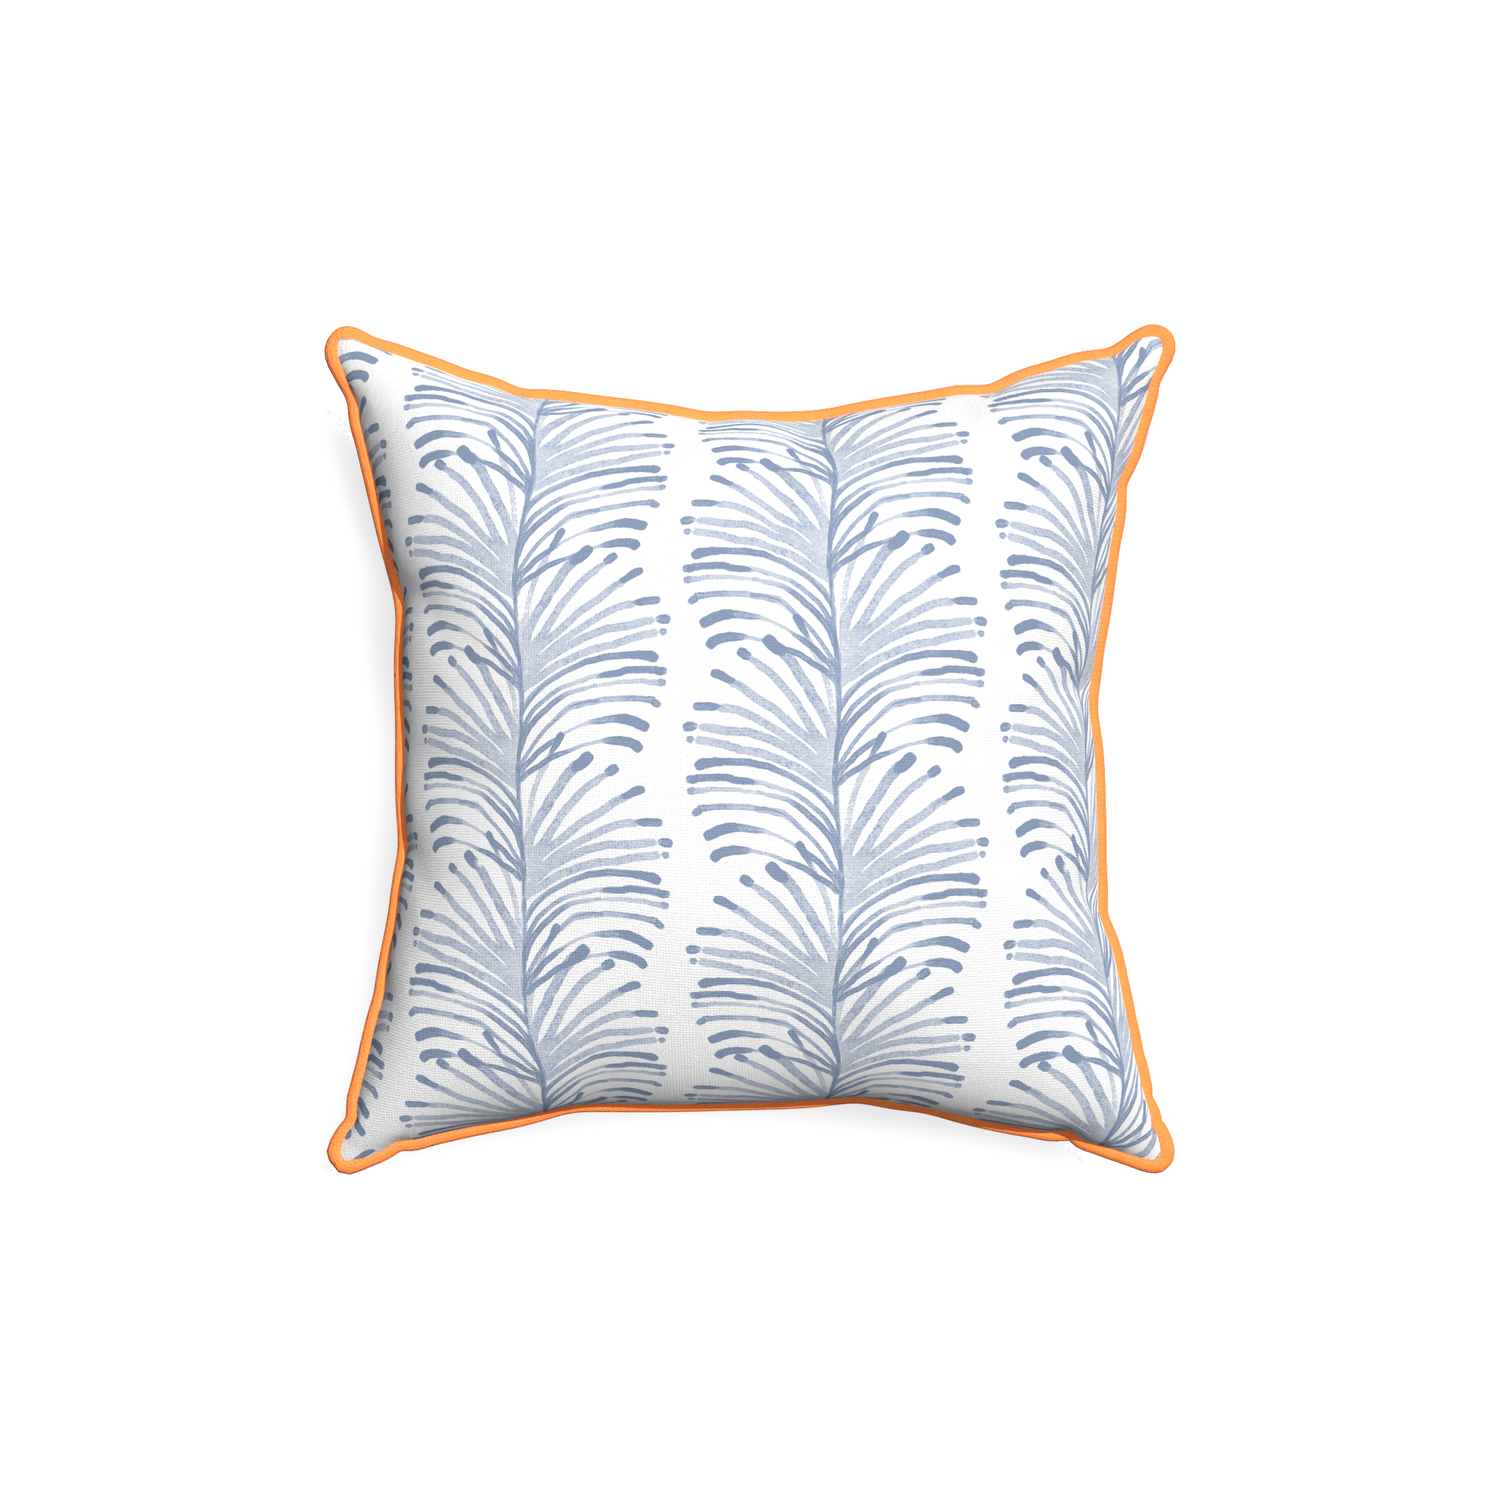 18-square emma sky custom pillow with clementine piping on white background